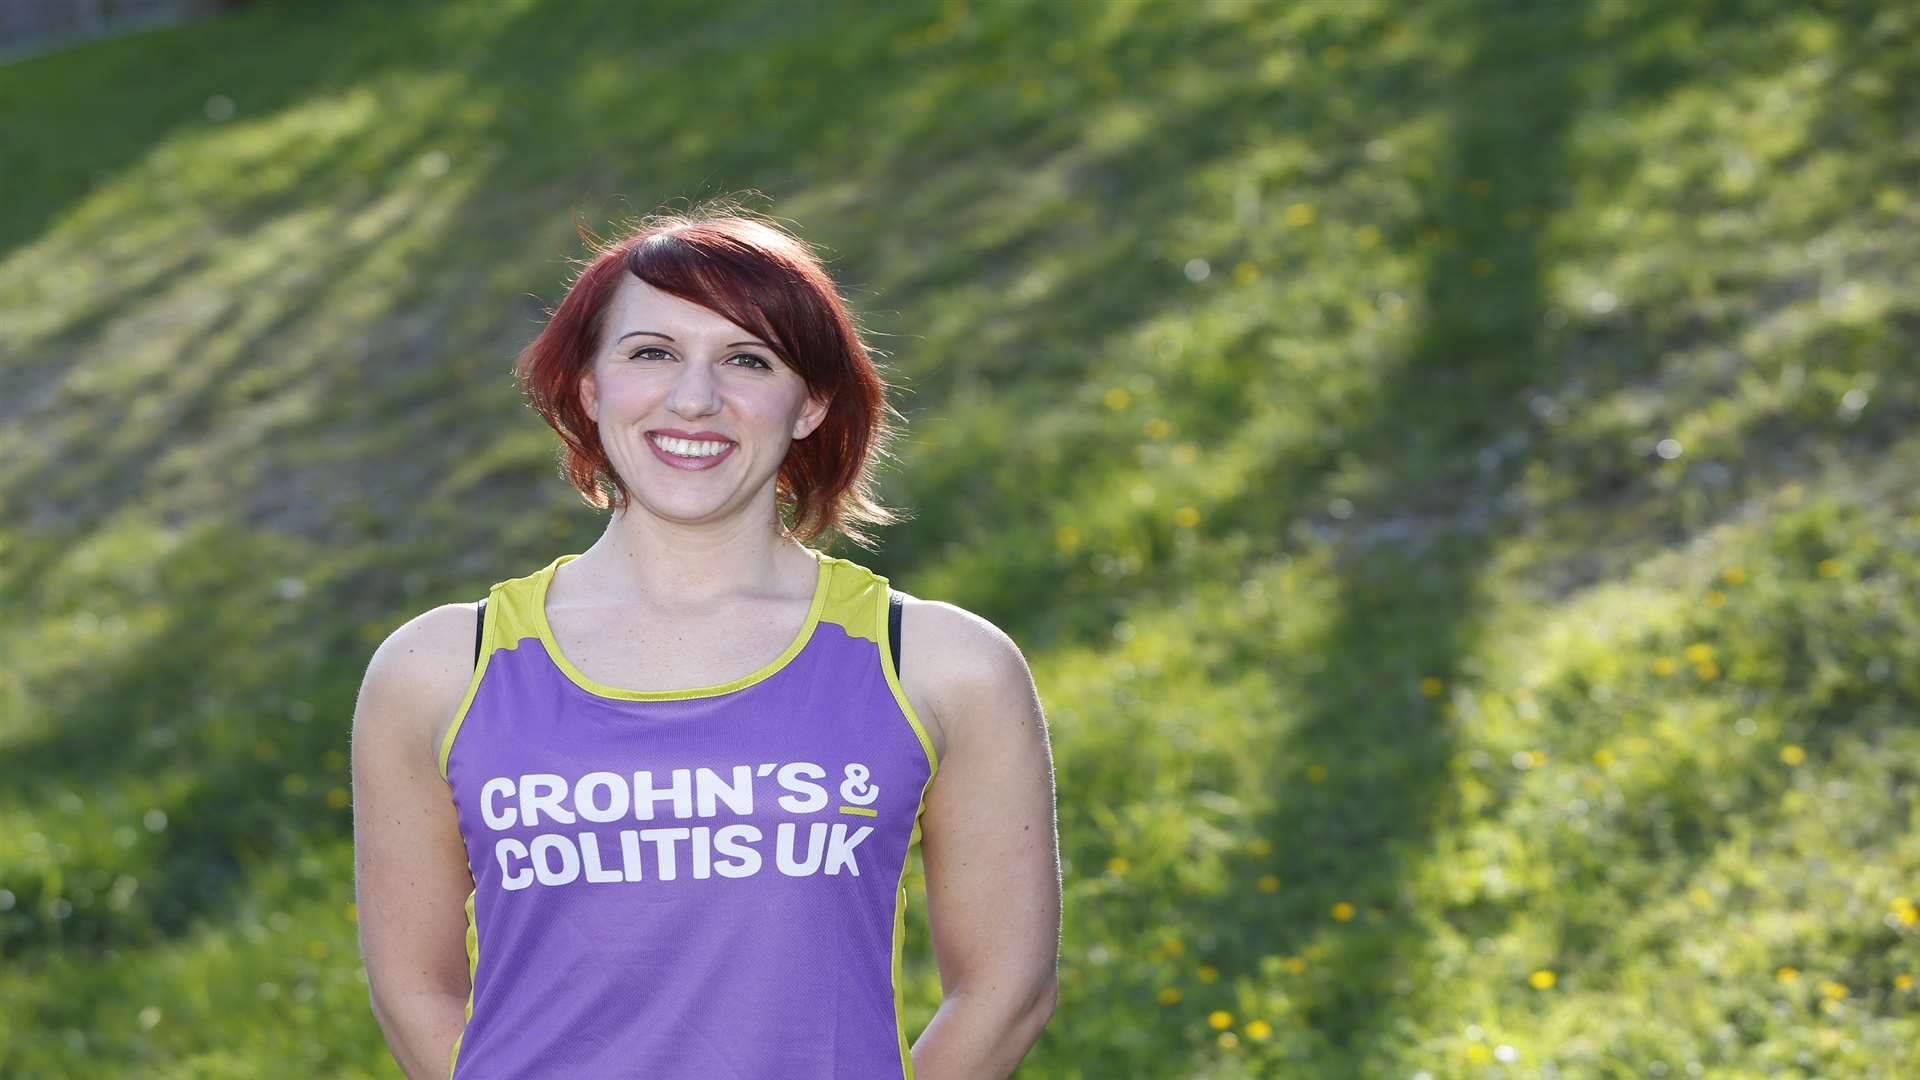 Louise is fundraising for Crohn's & Colitis UK in Sophie's memory